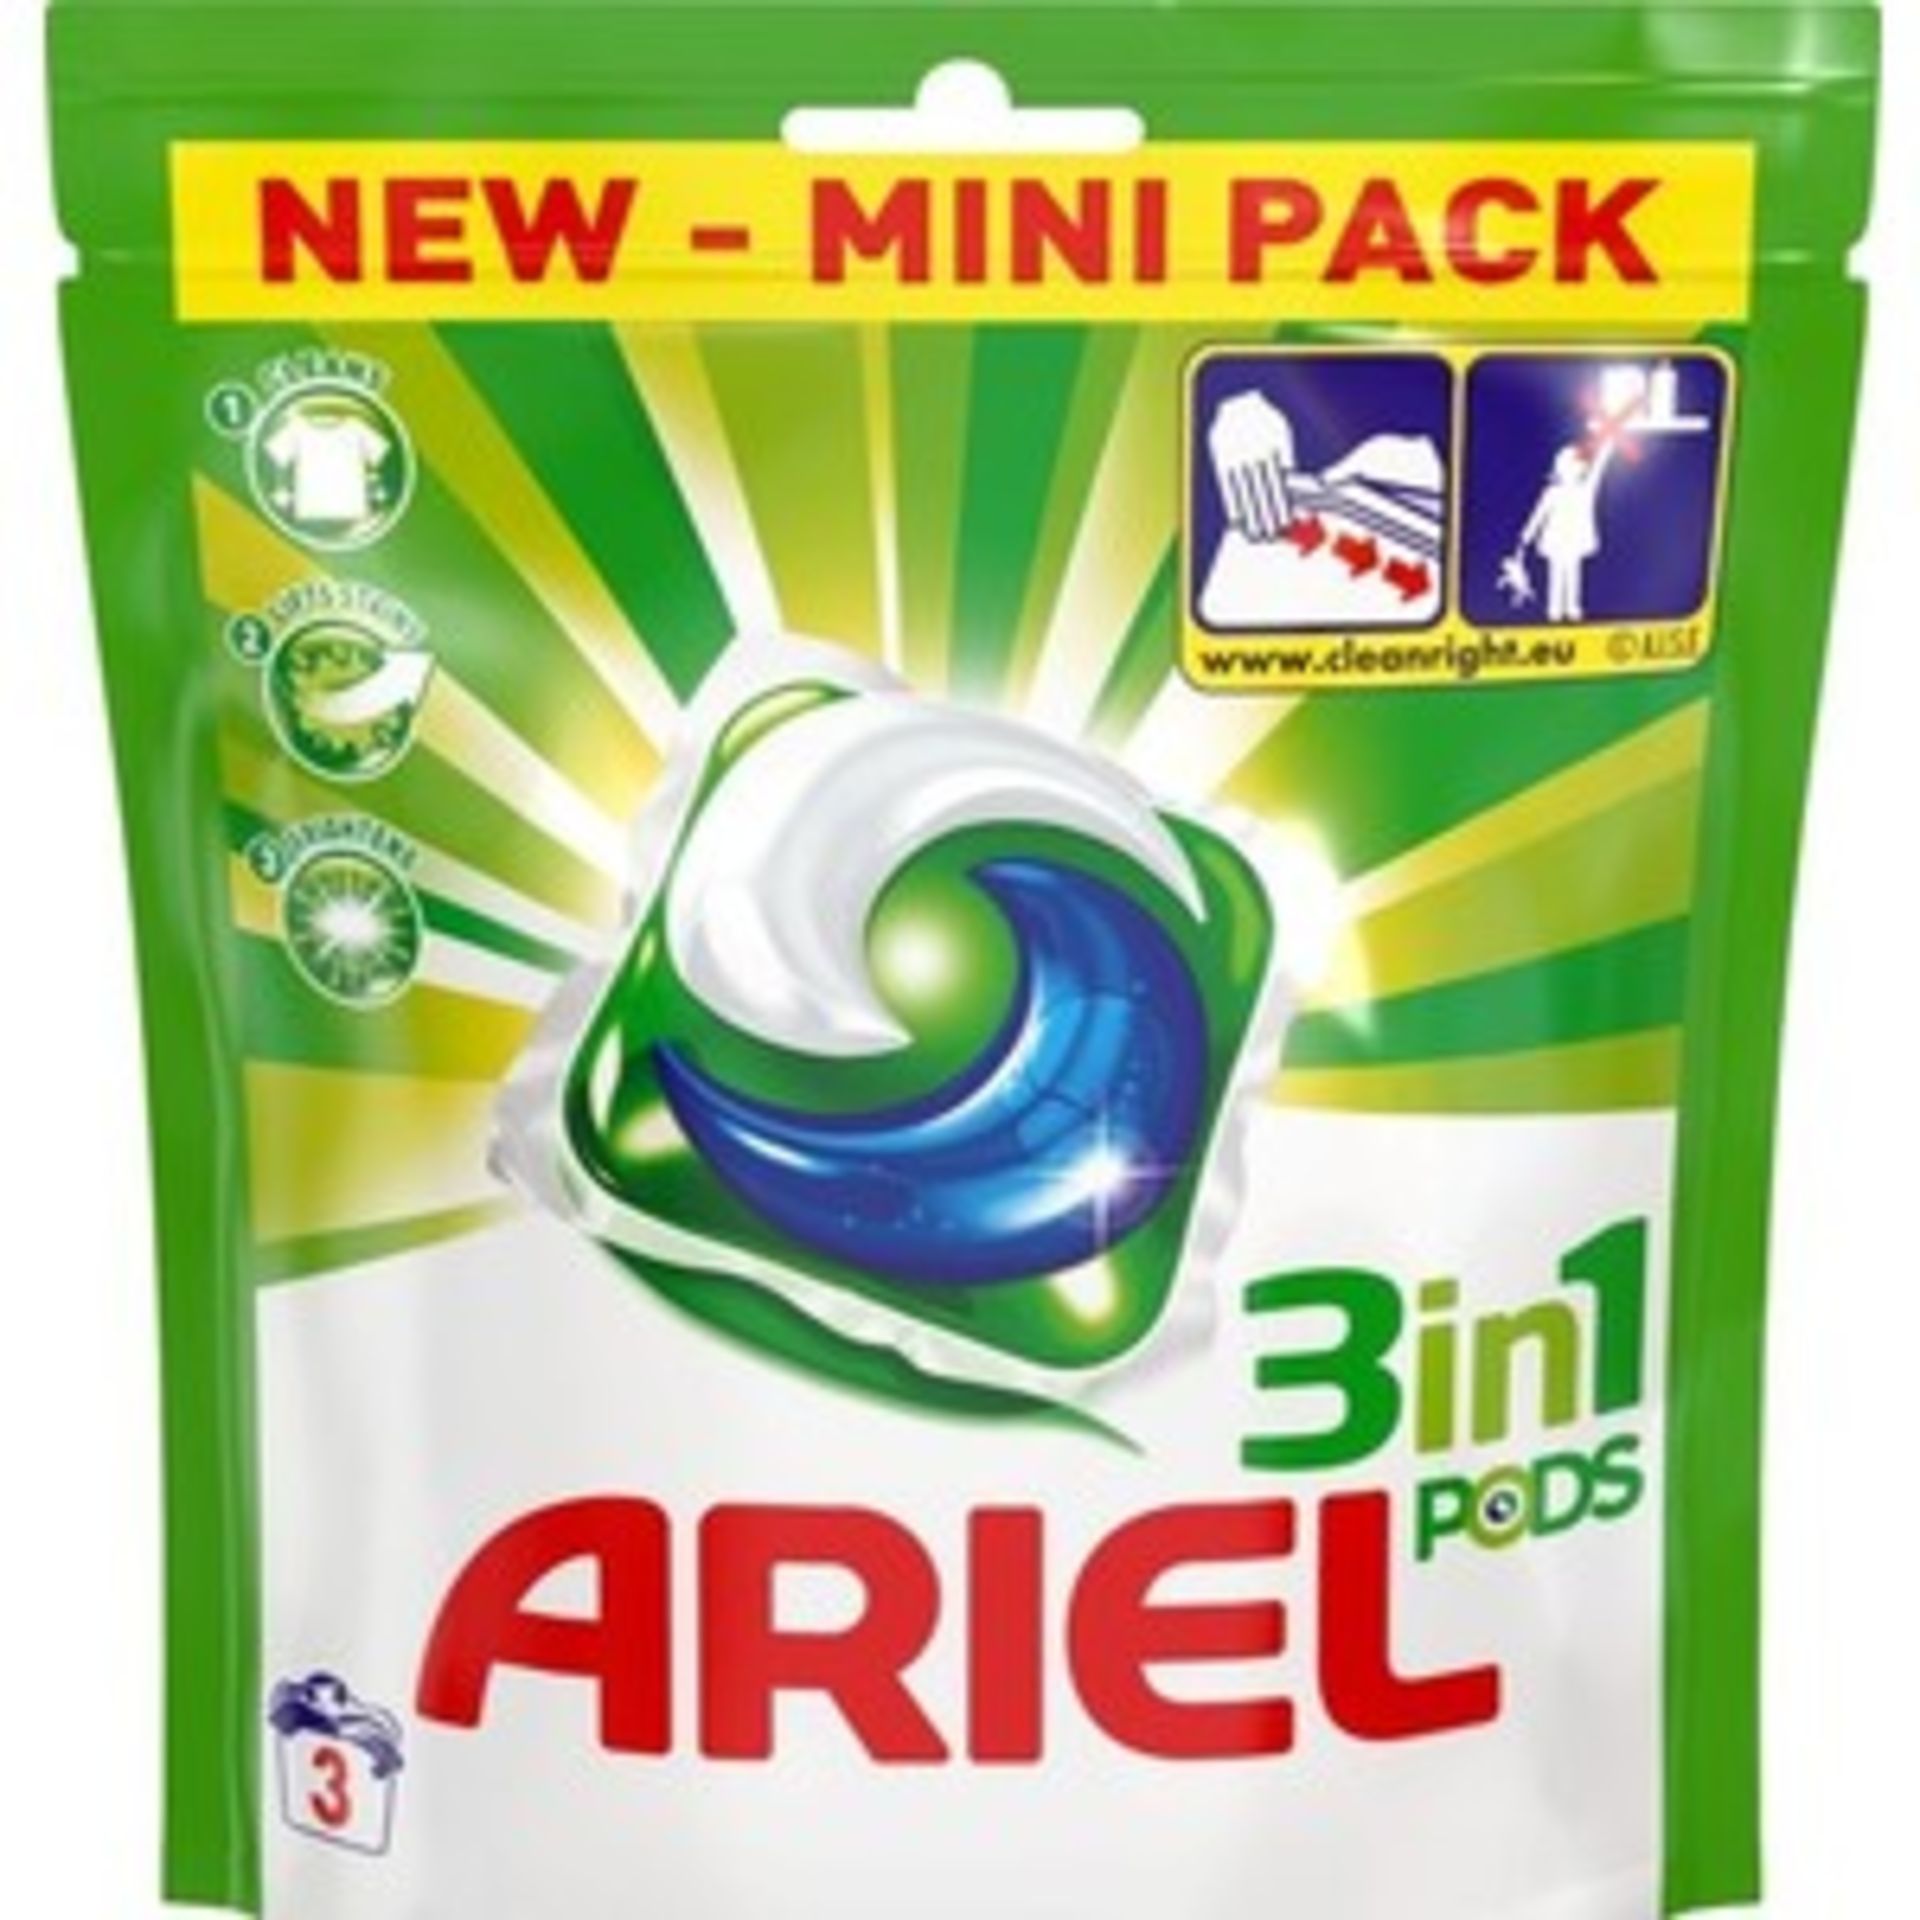 V *TRADE QTY* Brand New 12 Ariel 3-in-1 Pods Laundry Detergent X 4 YOUR BID PRICE TO BE MULTIPLIED